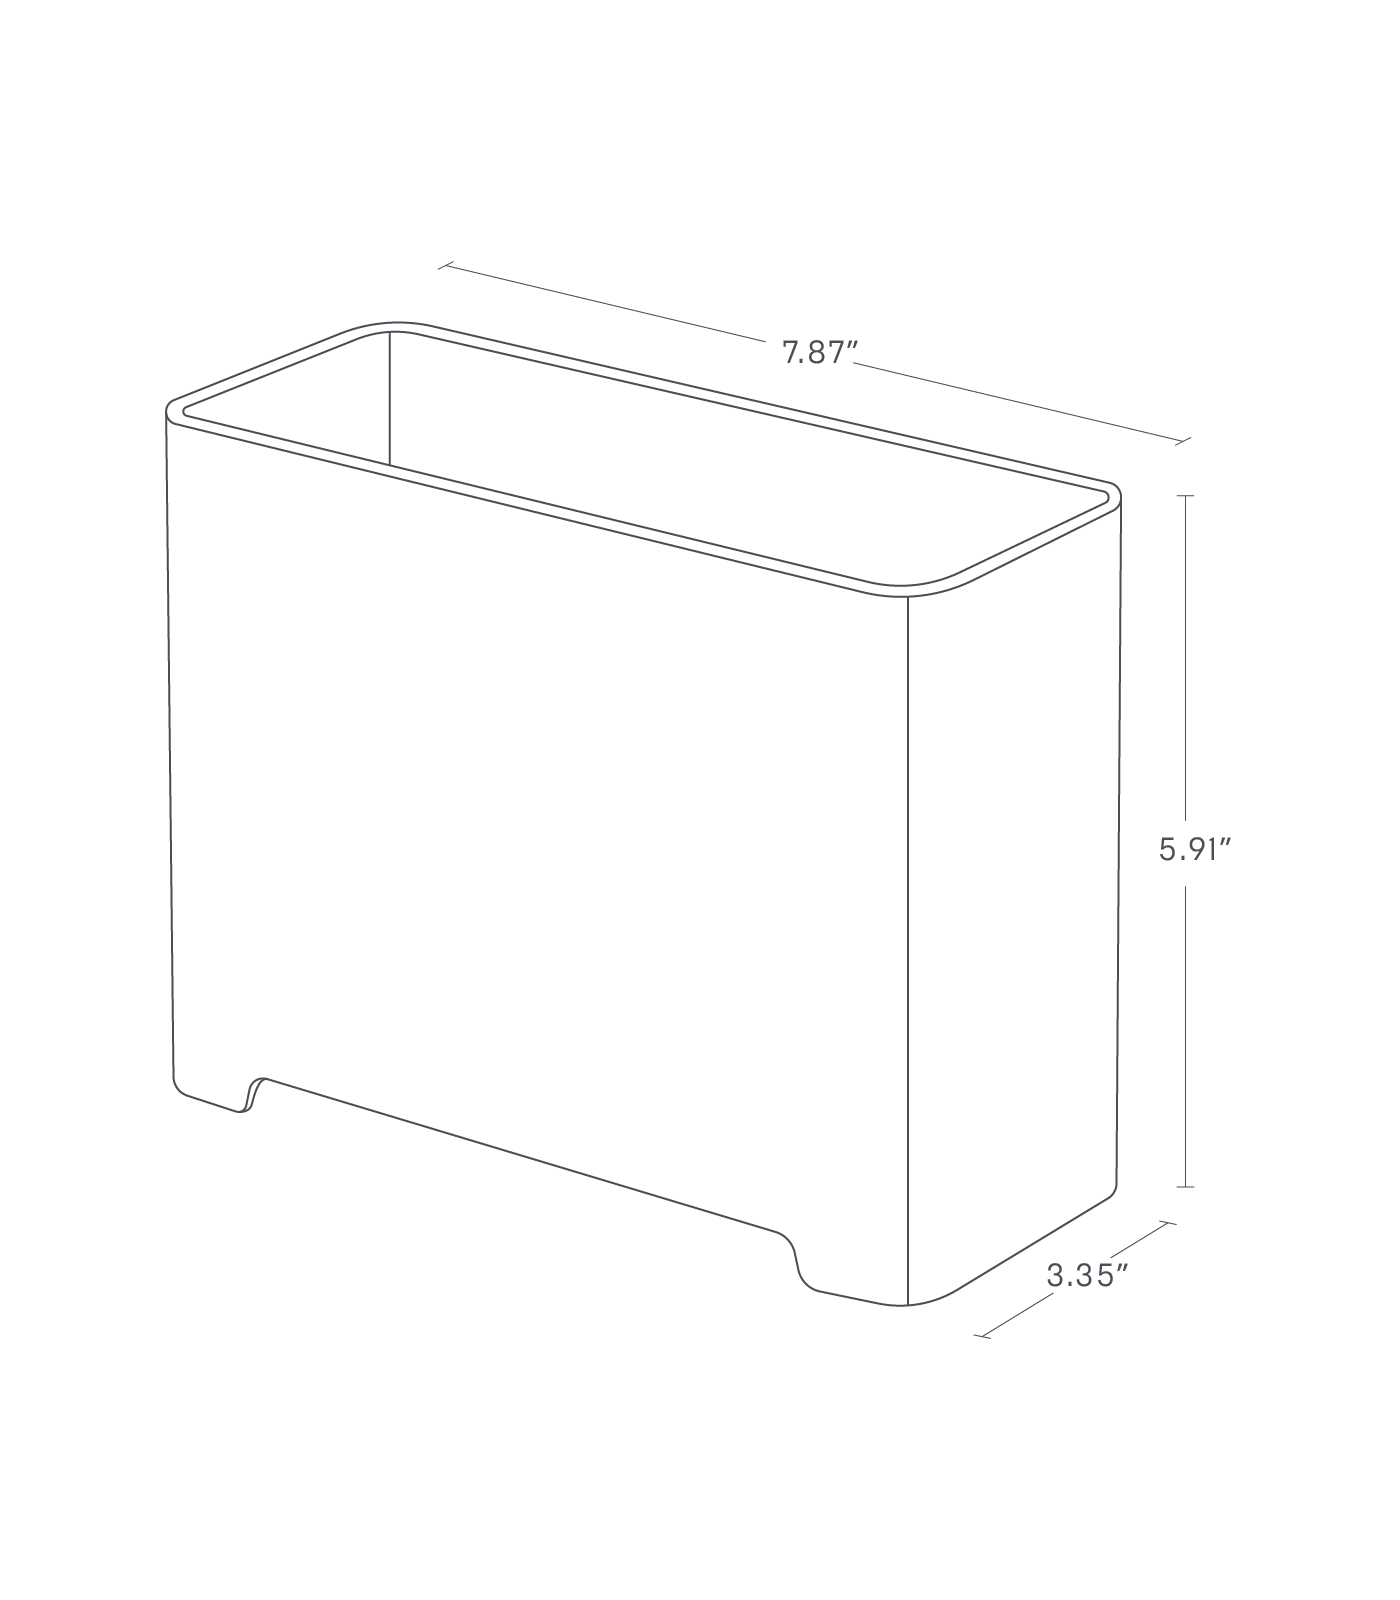 Dimenision image for Self-Draining Bath & Shower Organizeron a white background showing total width of 7.87